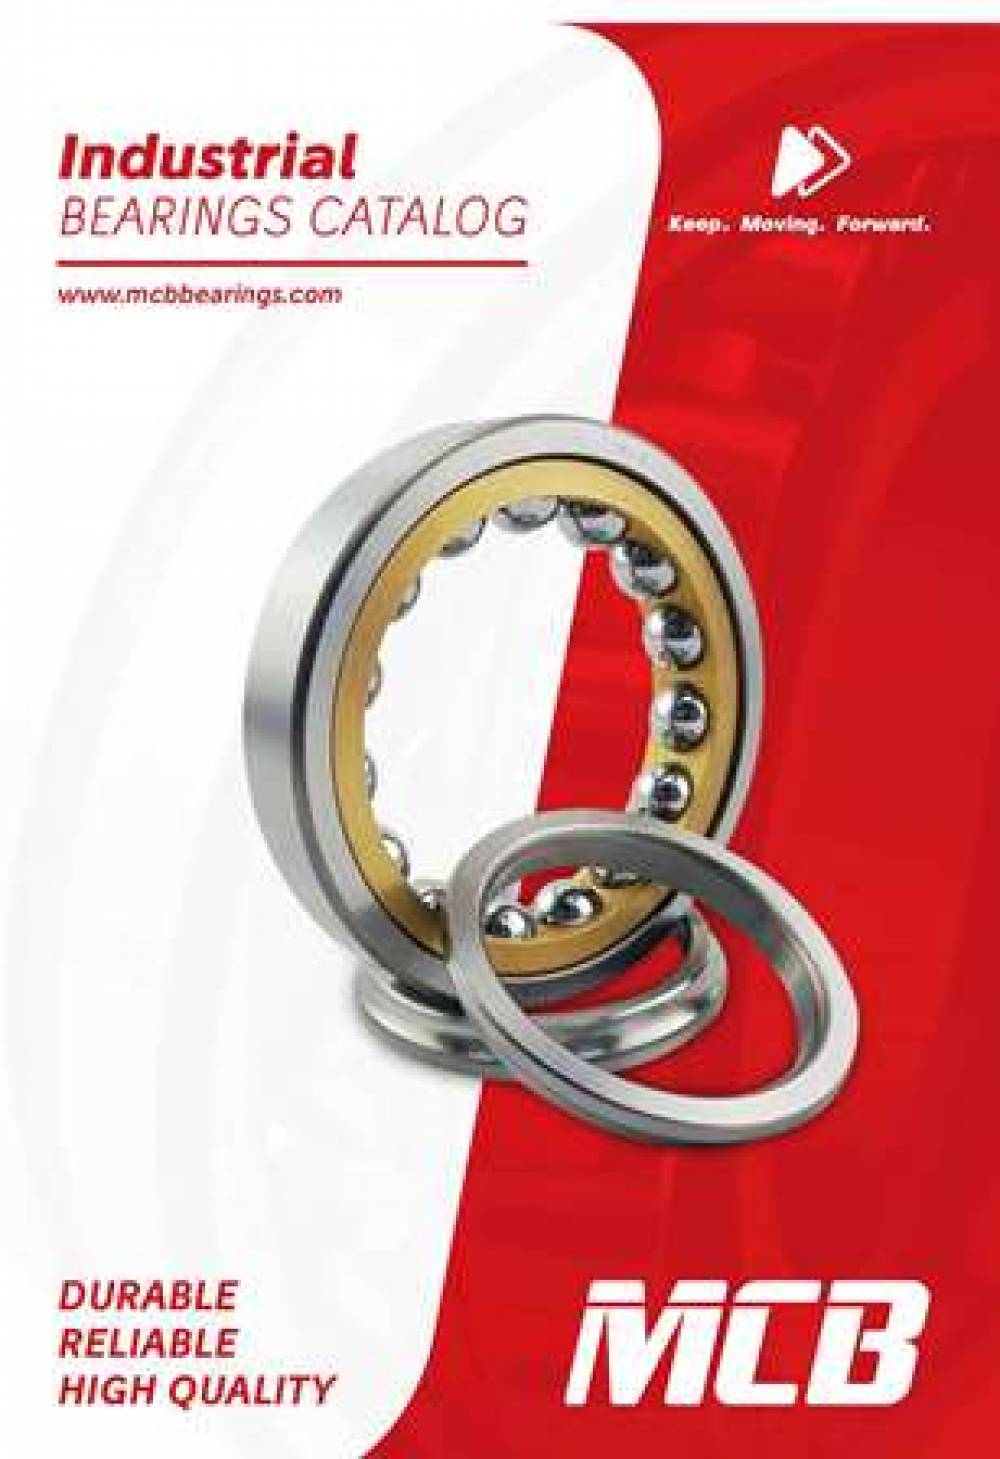 Check out MCB Brand’s New Industrial Catalog!